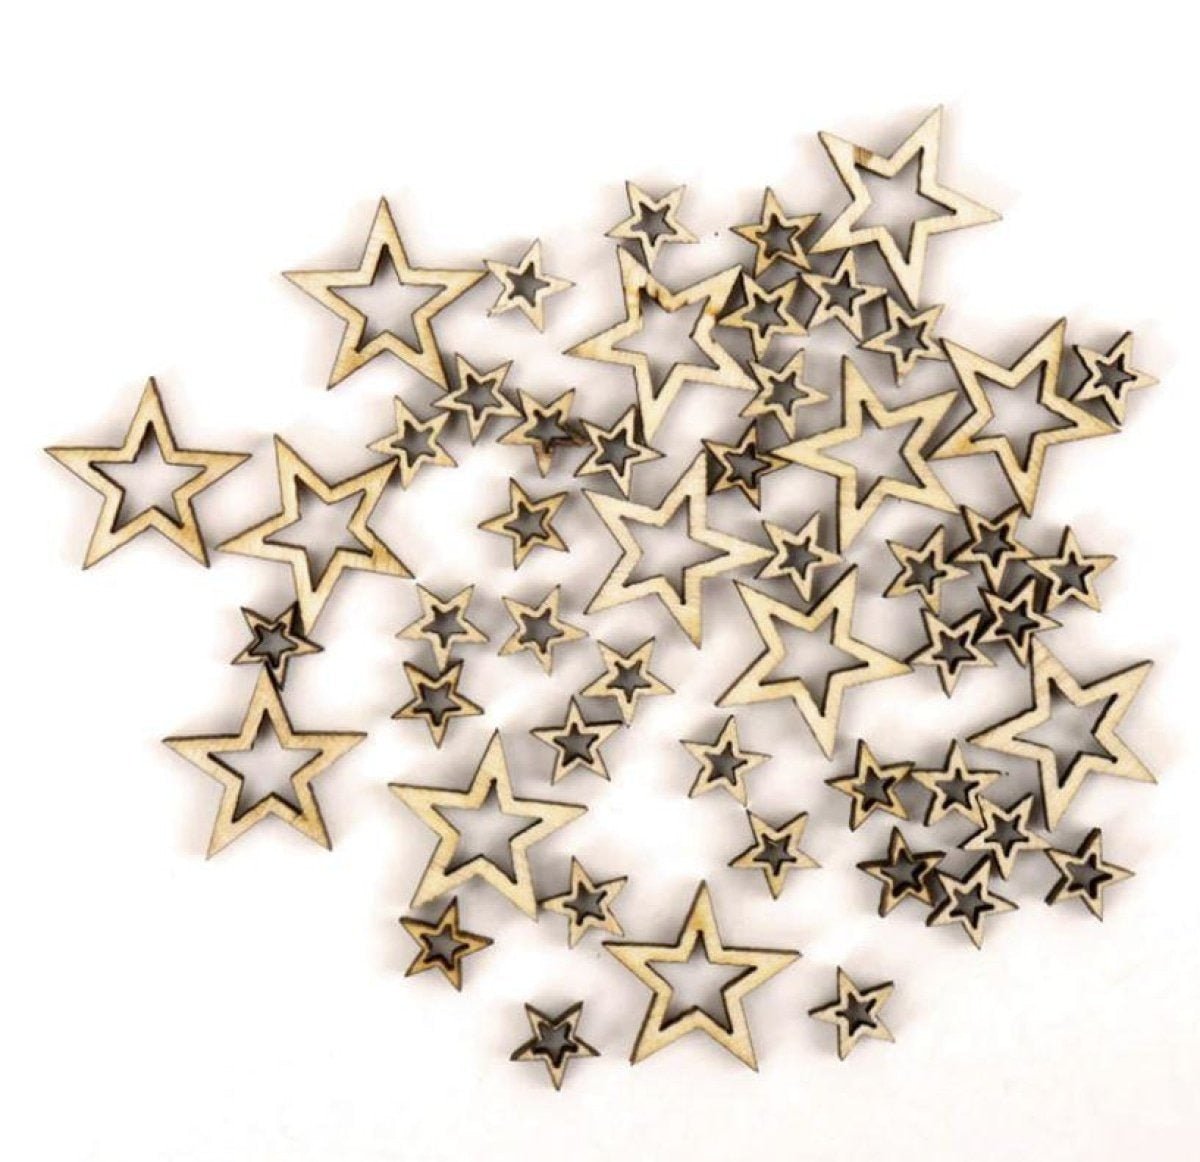 50/100pcs Wooden Stars Confetti 10-30mm Wood Crafts Decorations Centre-Removed - 100pcs 10-20mm Mixed - - Asia Sell